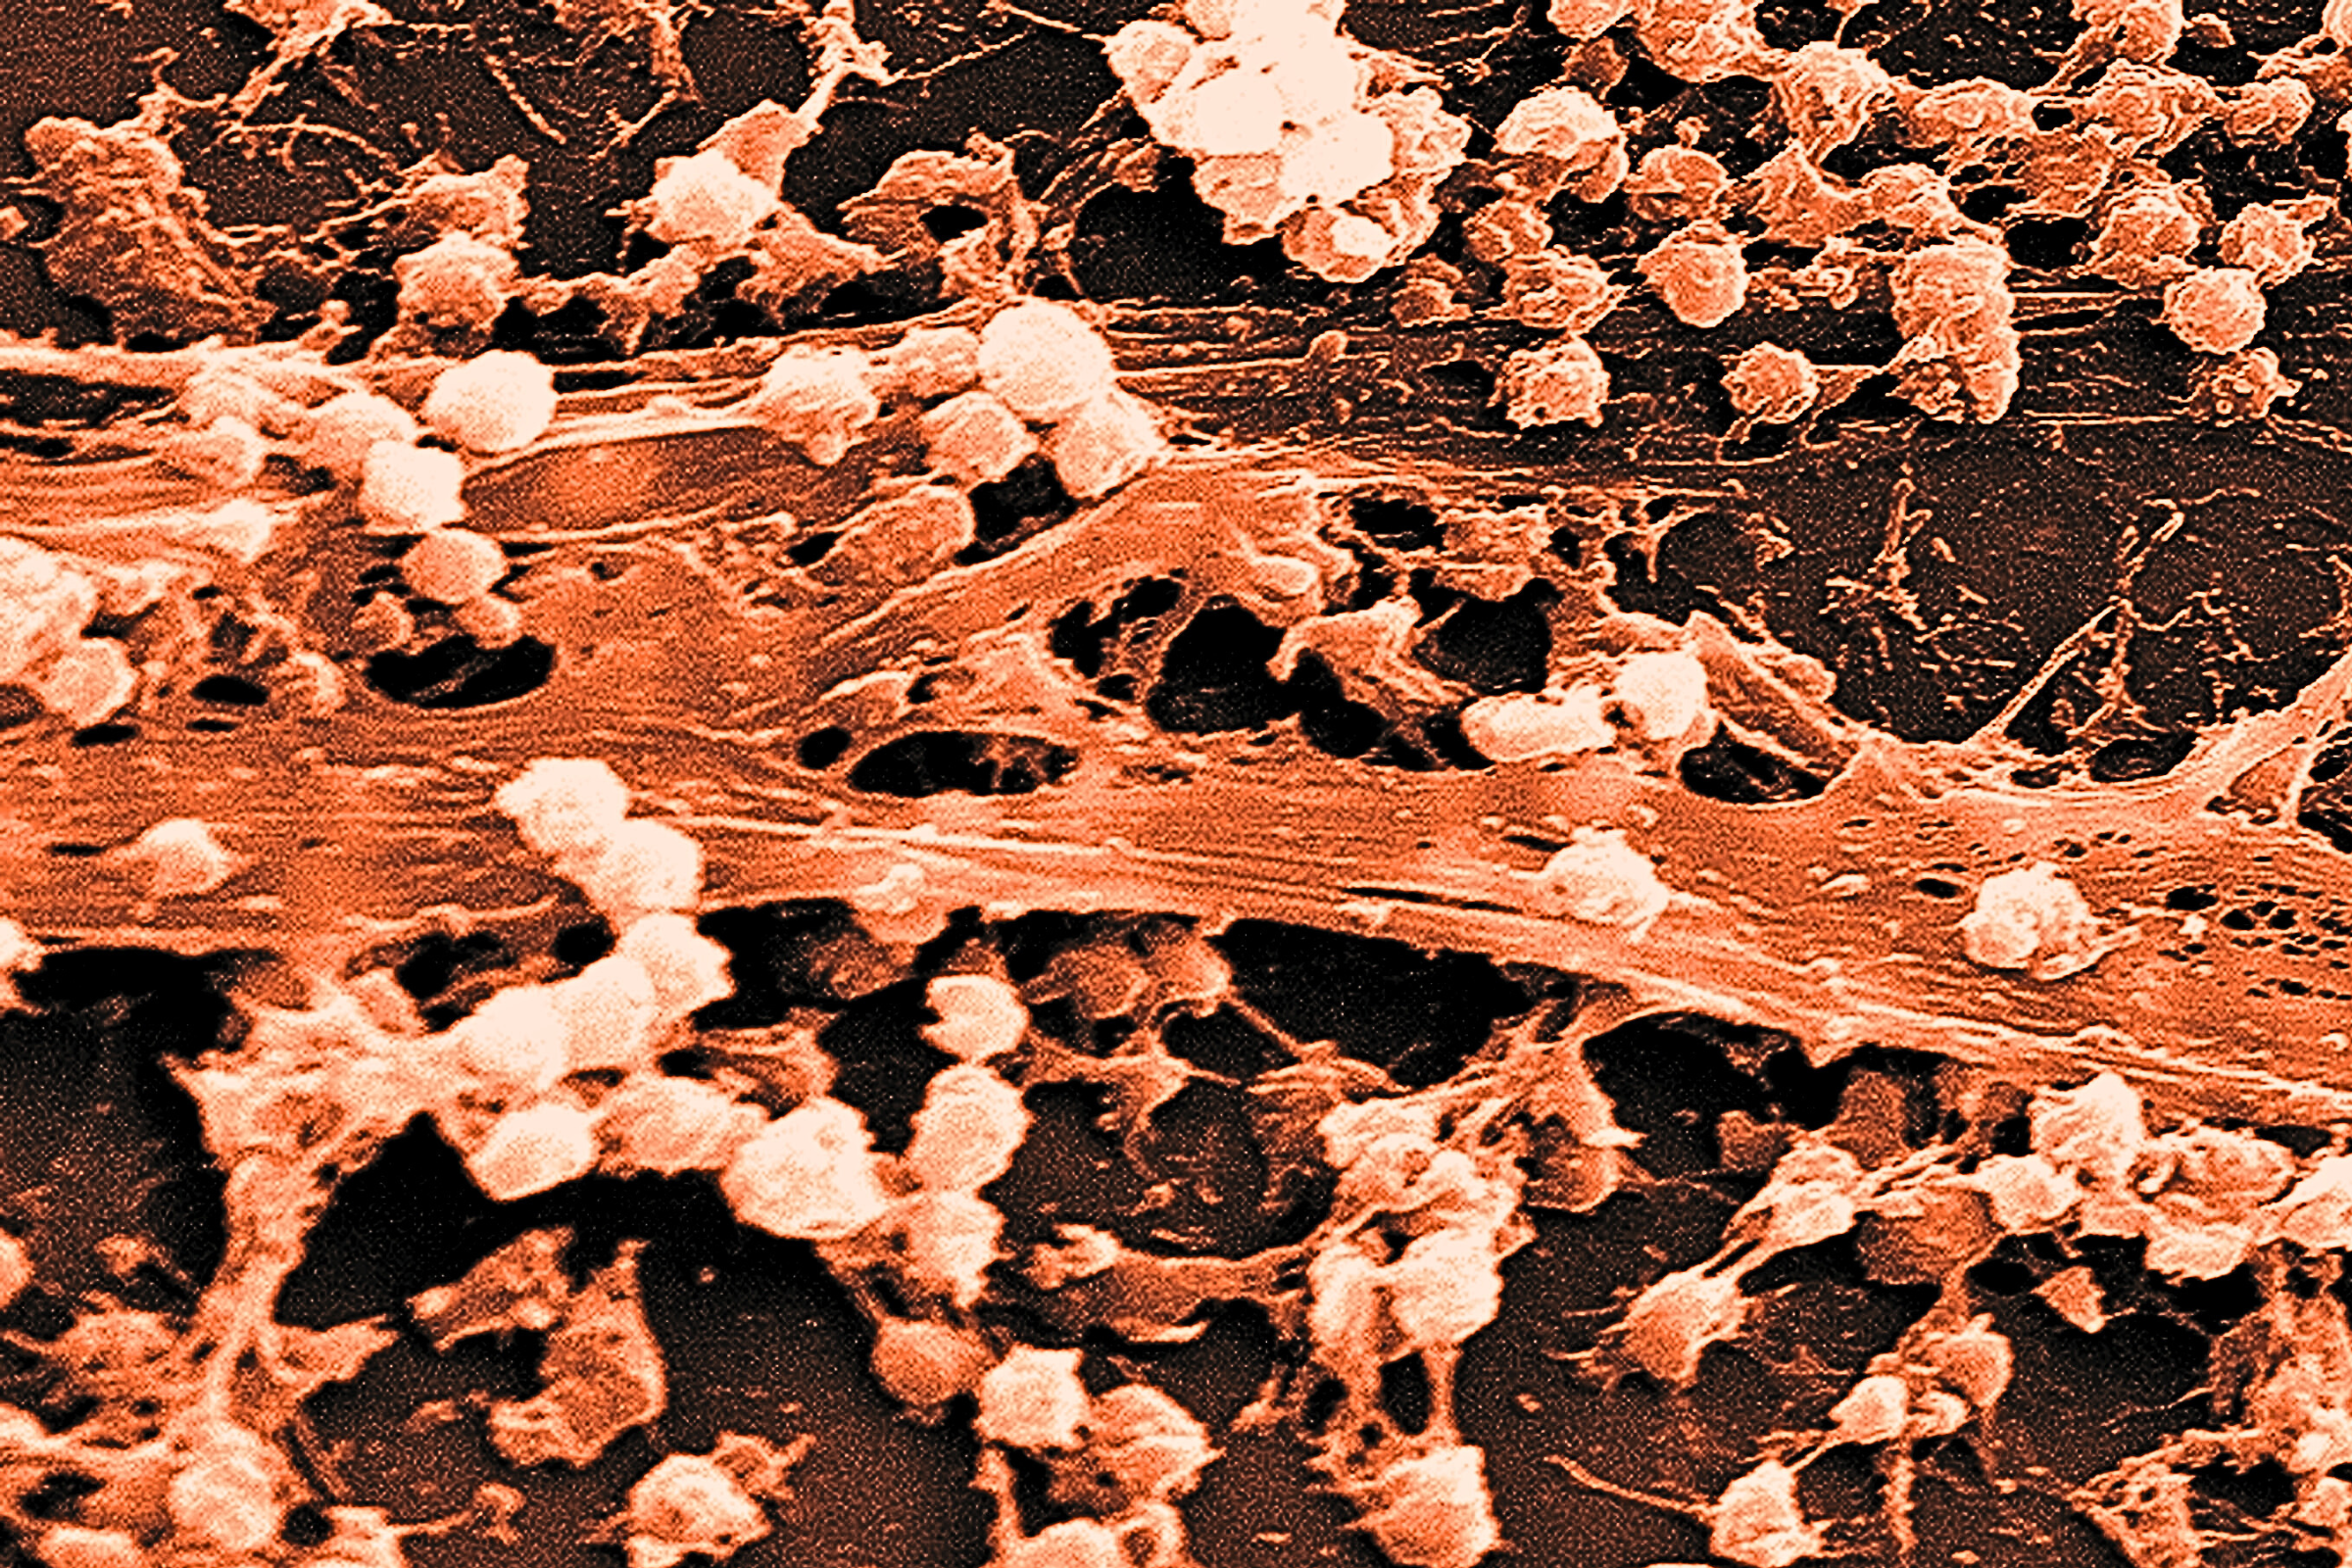 Electron microscope image of bacterial biofilm